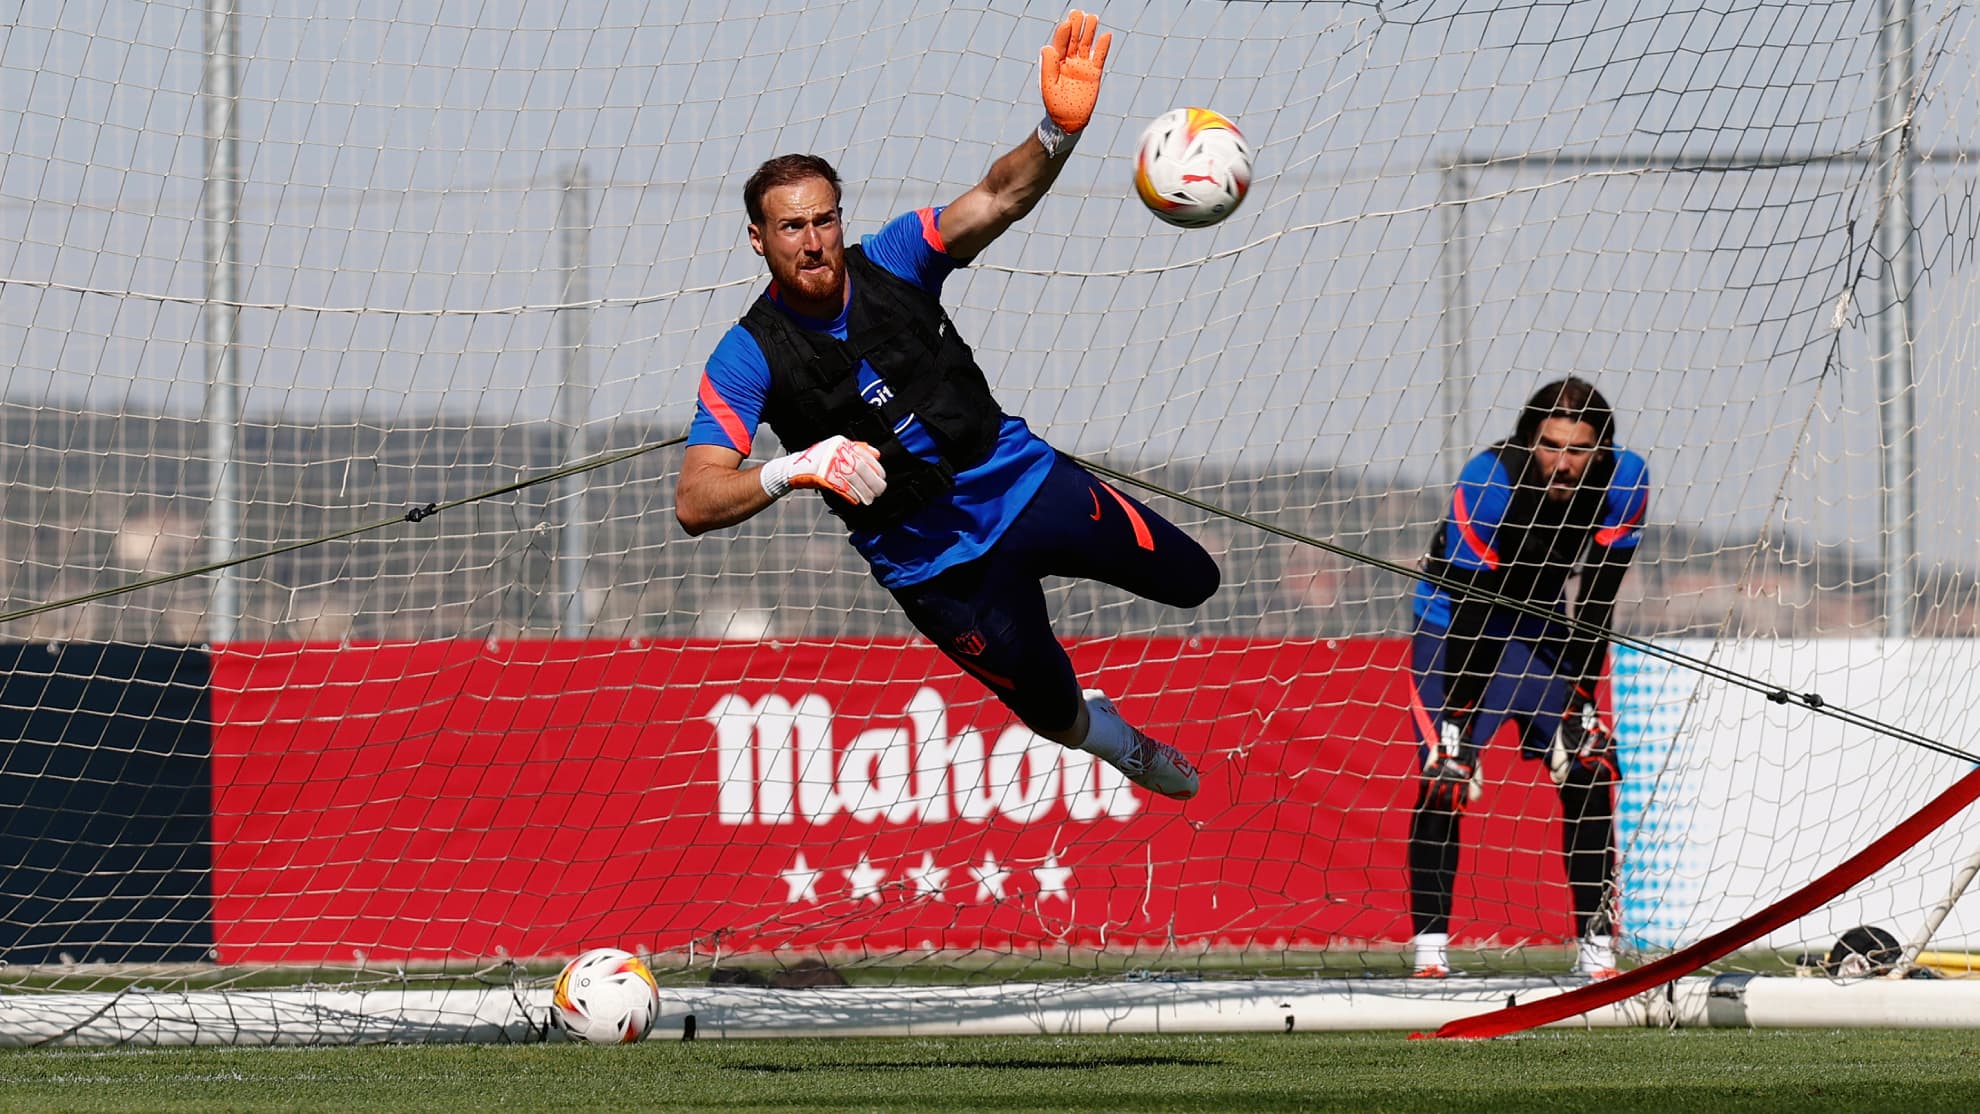 Shaping the goalkeeper of the future: Basic criteria for conditioning work during preseason